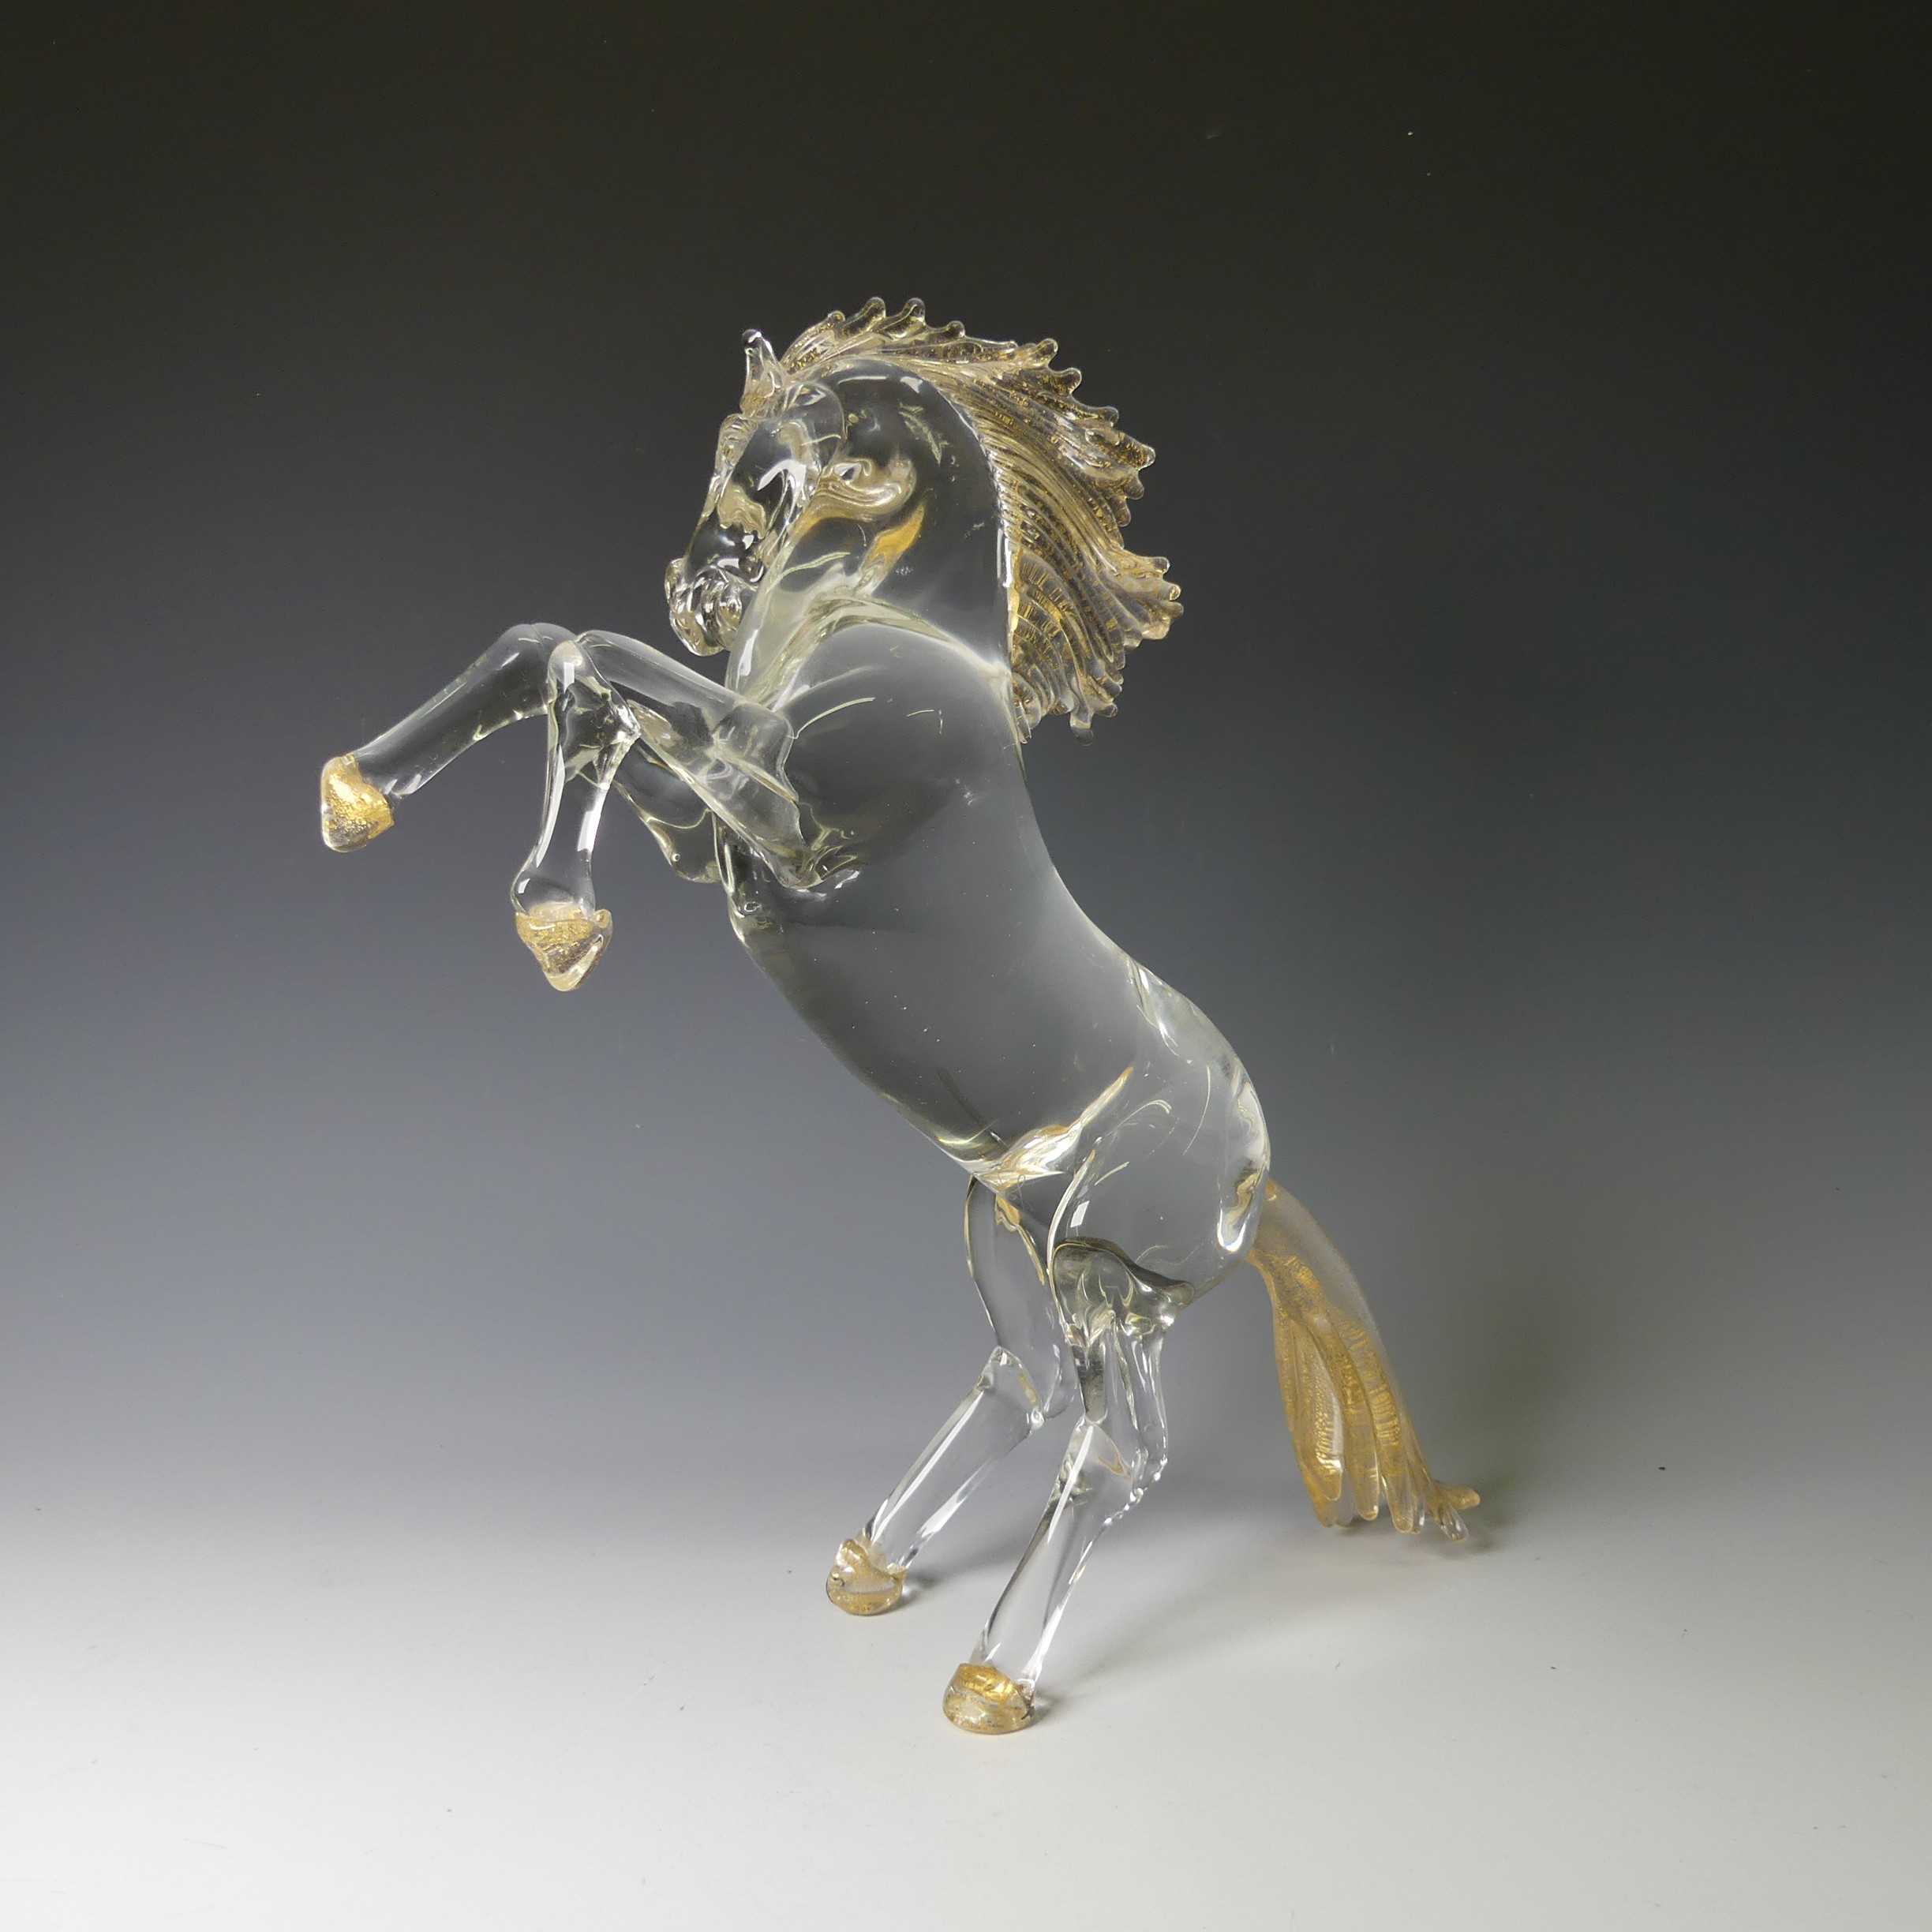 A Foscari Murano clear glass sculpture of a Rearing Horse, modelled in clear glass with gold - Bild 4 aus 5